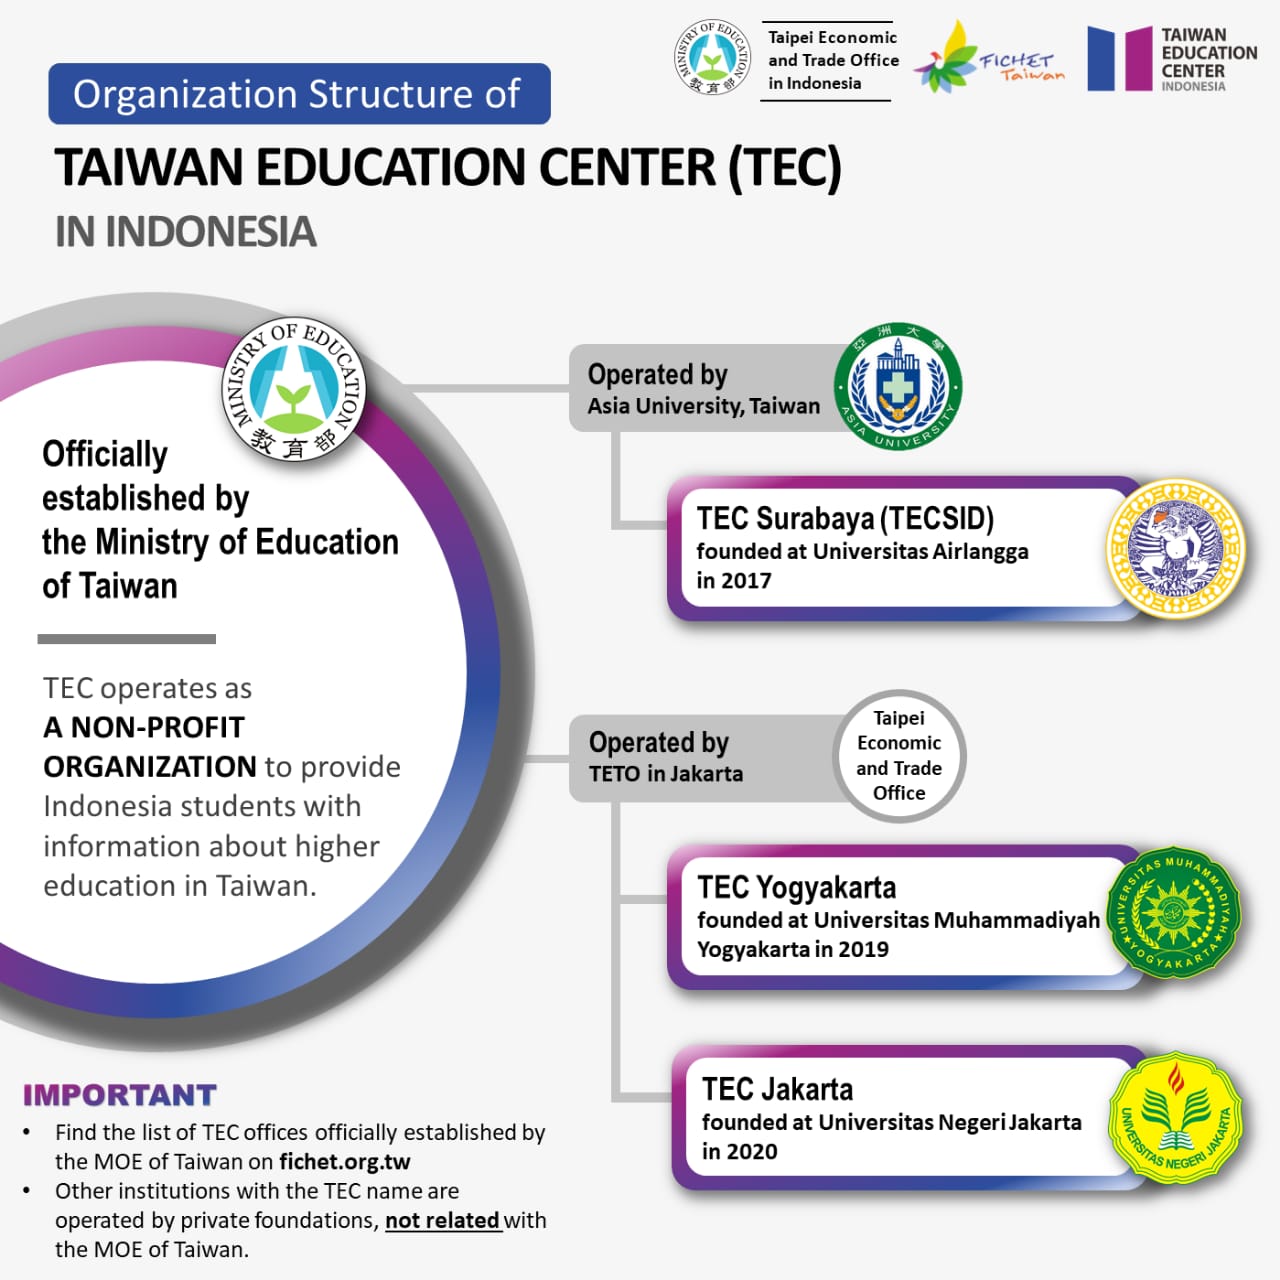 Taiwan Education Center in Indonesia